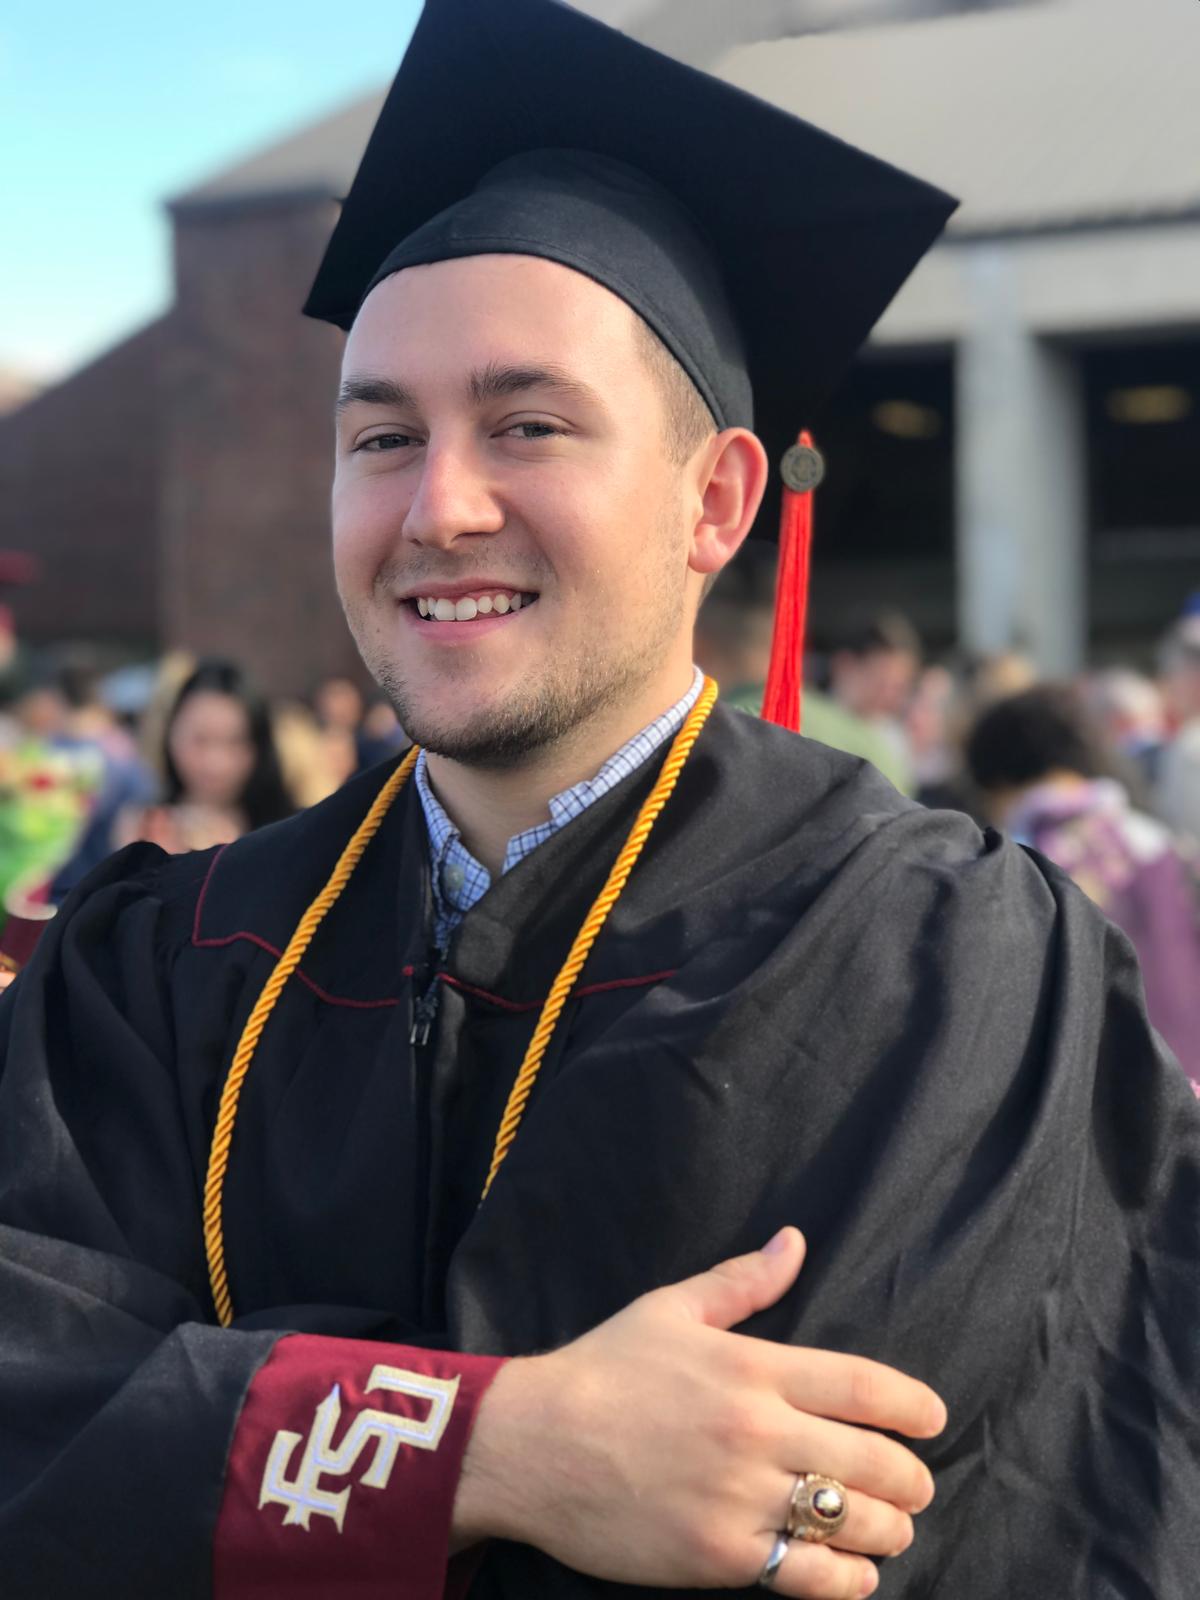 Griffin, when he graduated college. (Courtesy of <a href="https://www.instagram.com/griffin.furlong/">Griffin Furlong</a>)